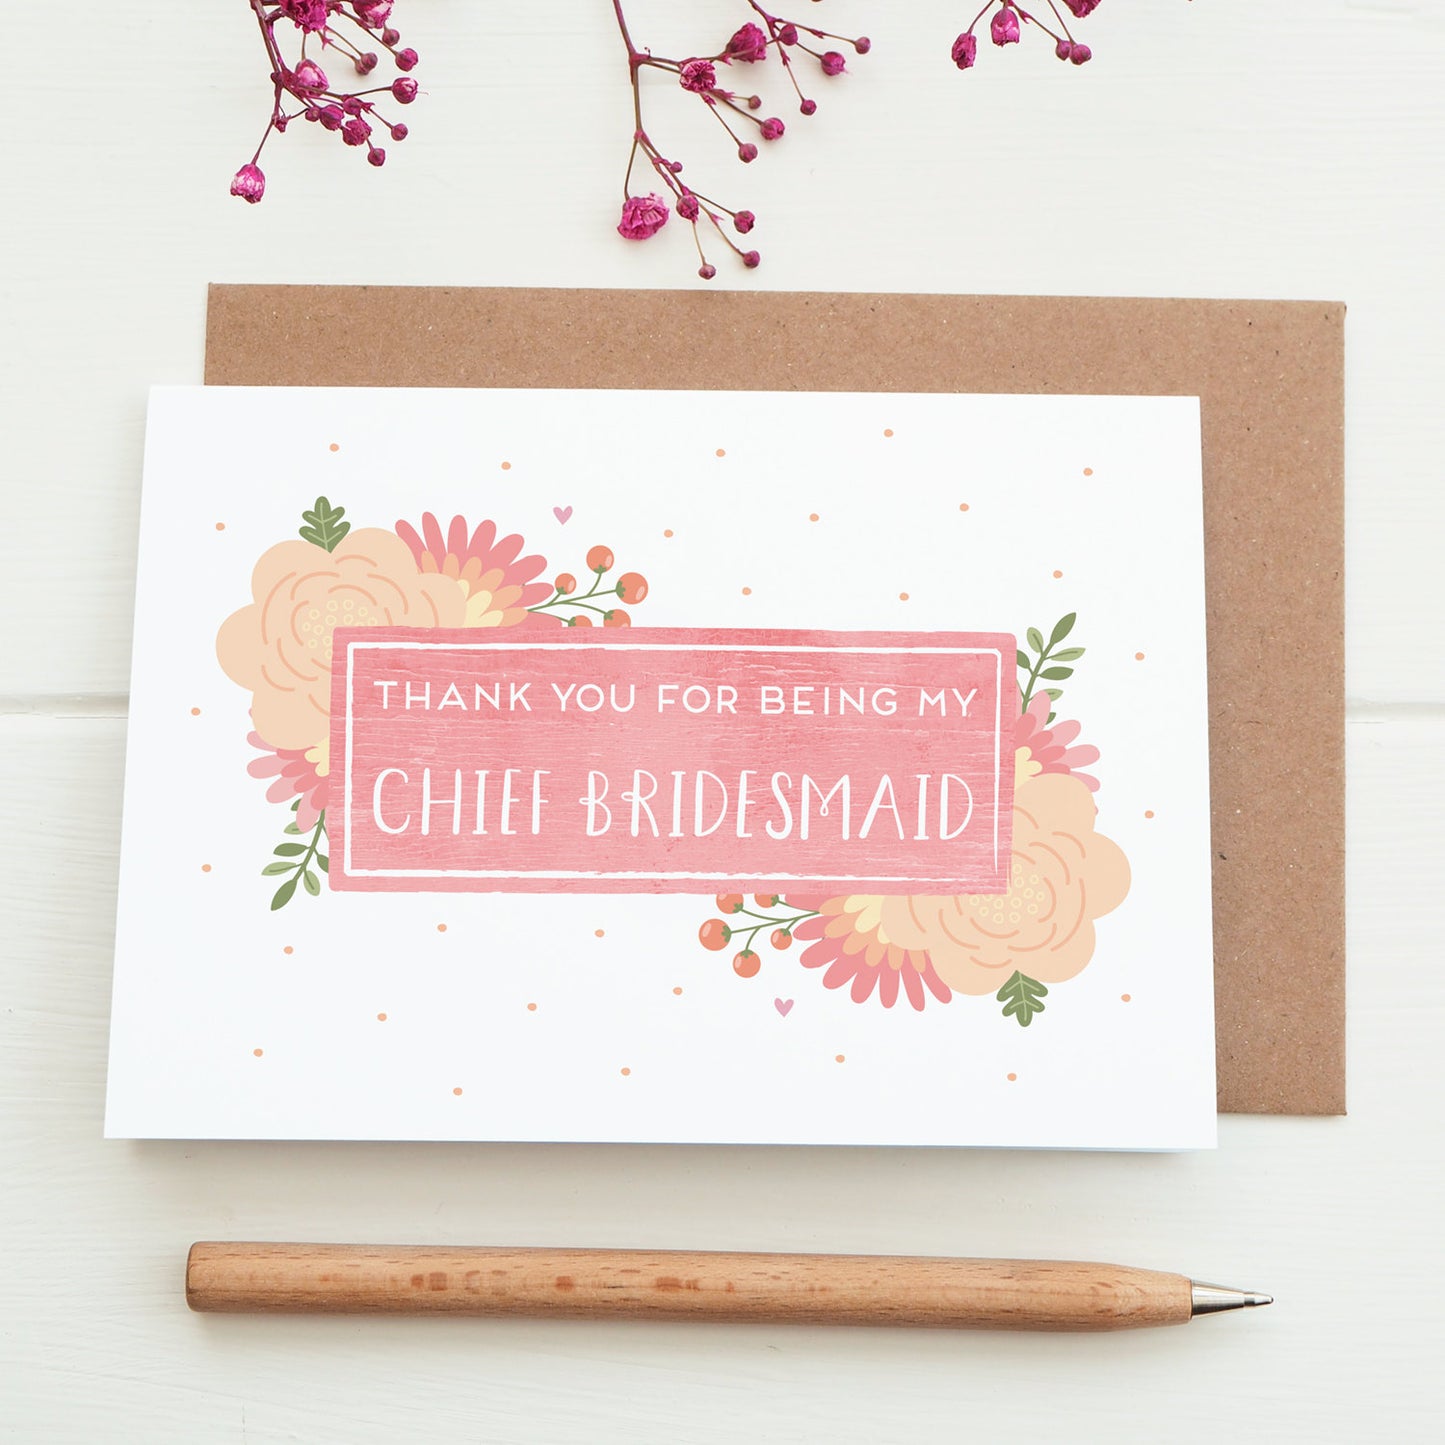 Thank you for being my chief bridesmaid card in pink